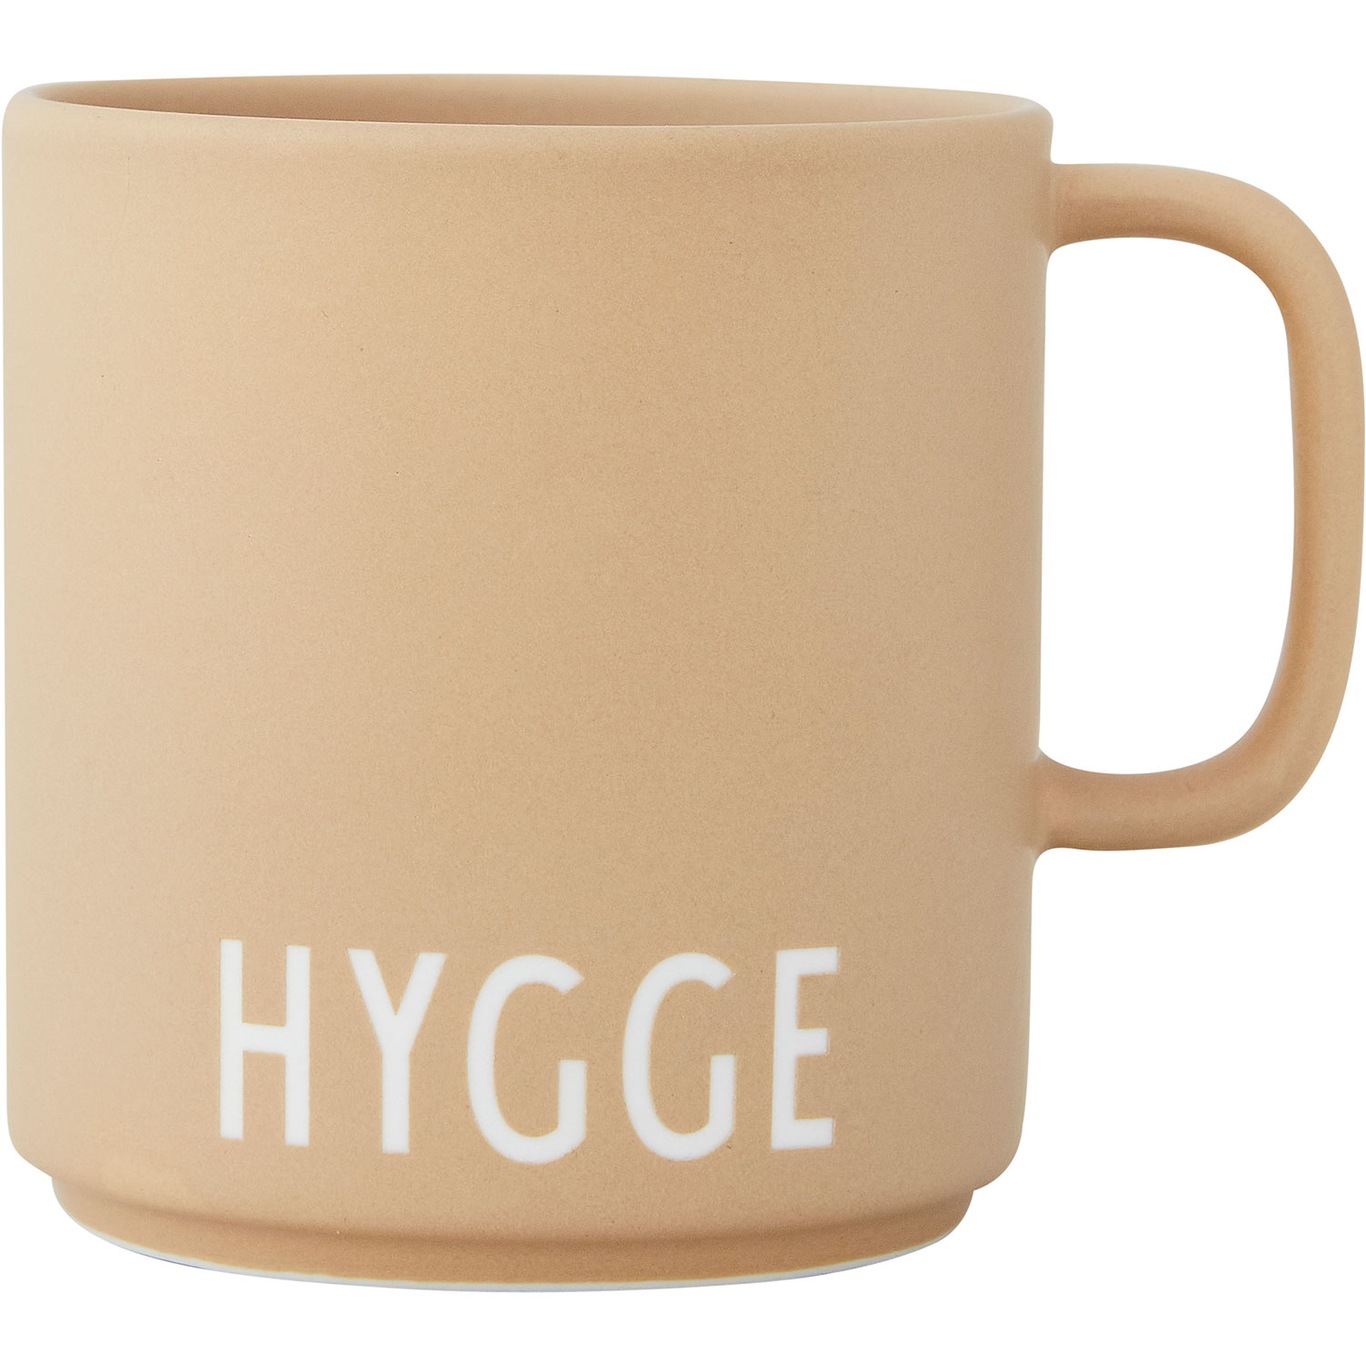 Favourite Cup, Hygge